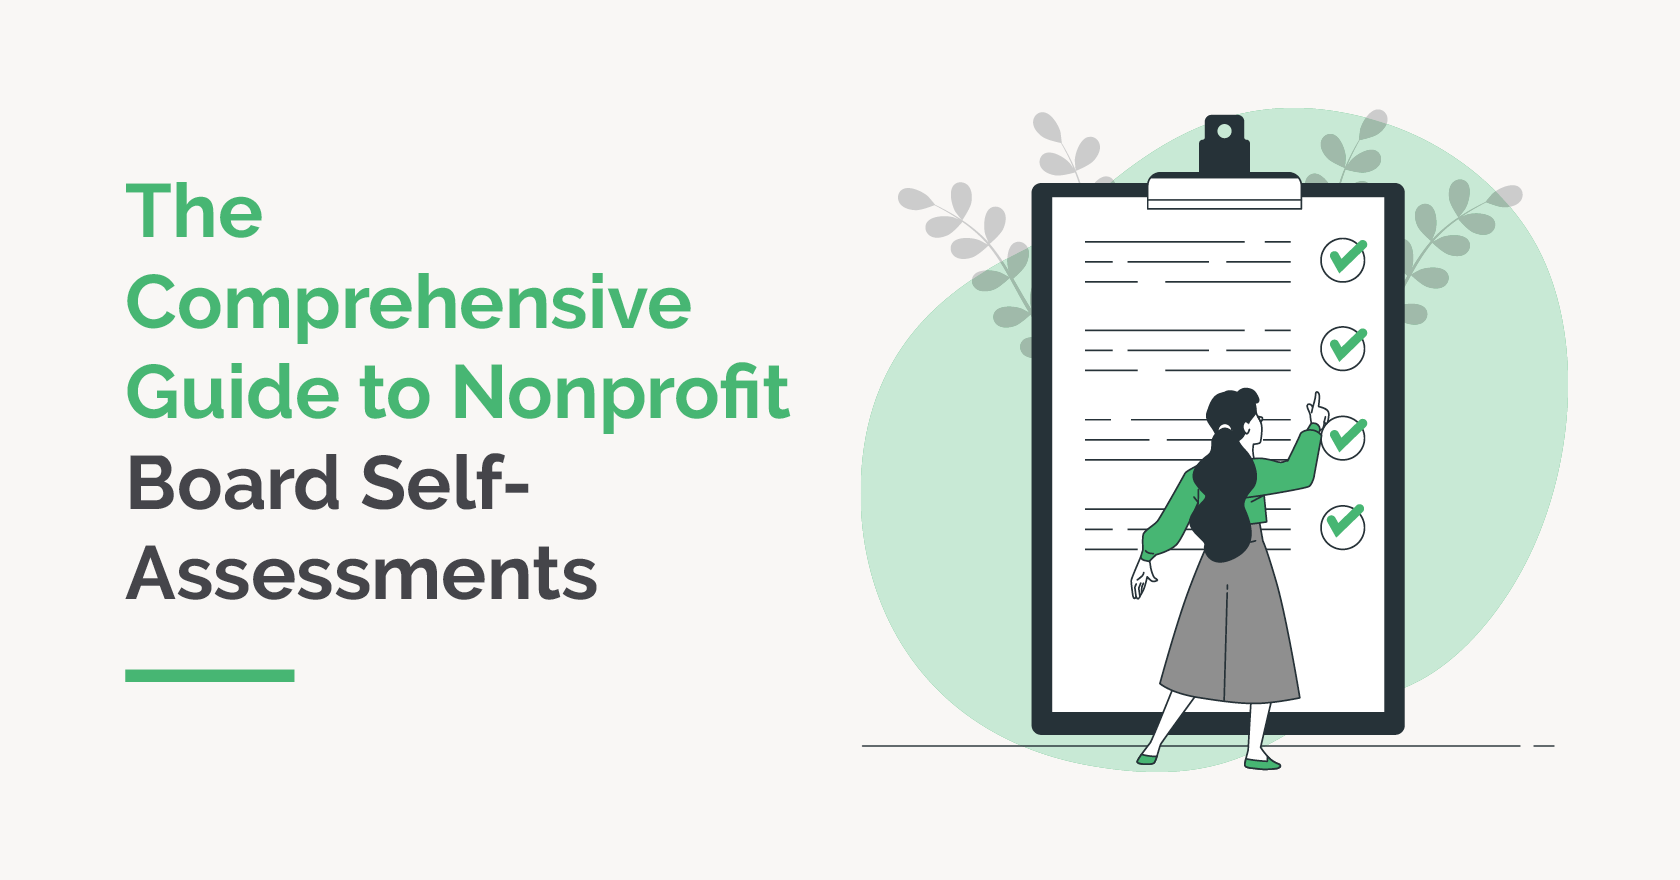 The article’s title, “The Comprehensive Guide to Nonprofit Board Self-Assessments,” next to an illustration of someone looking at a checklist.